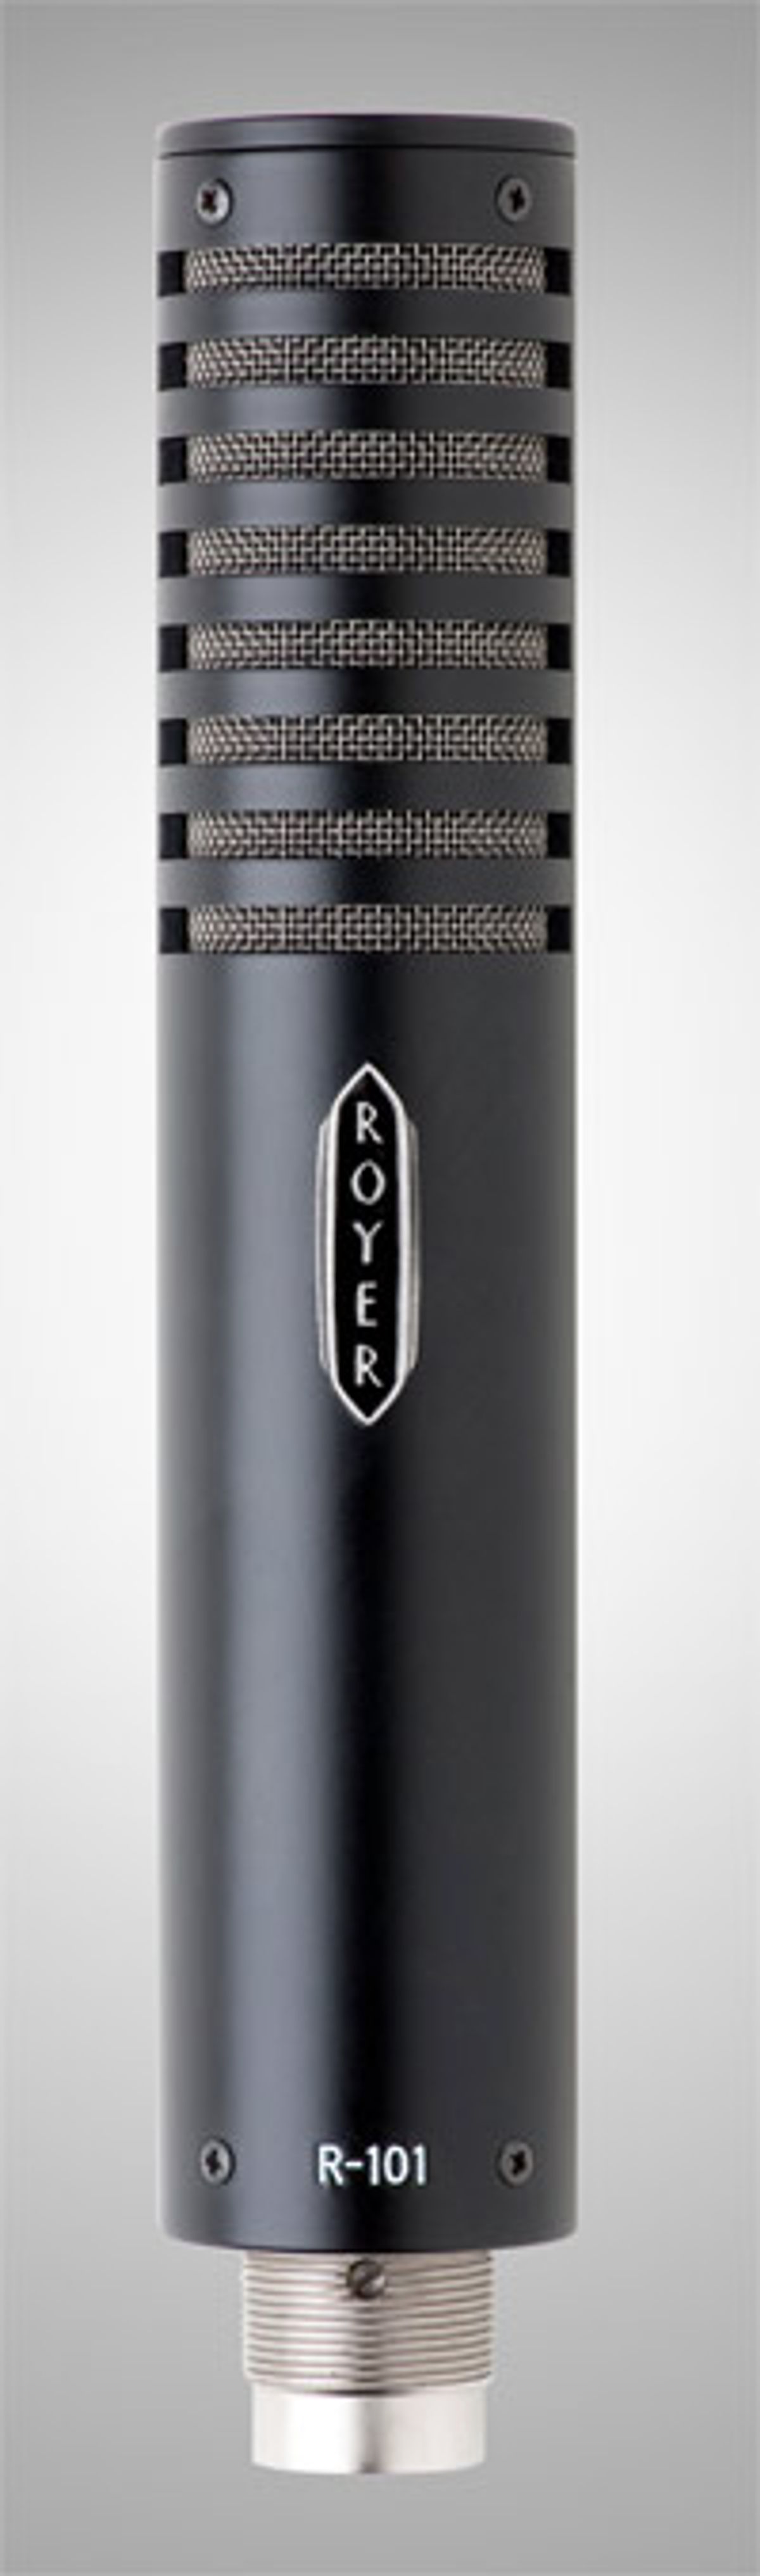 Royer Labs Debuts R-101 Ribbon Microphone